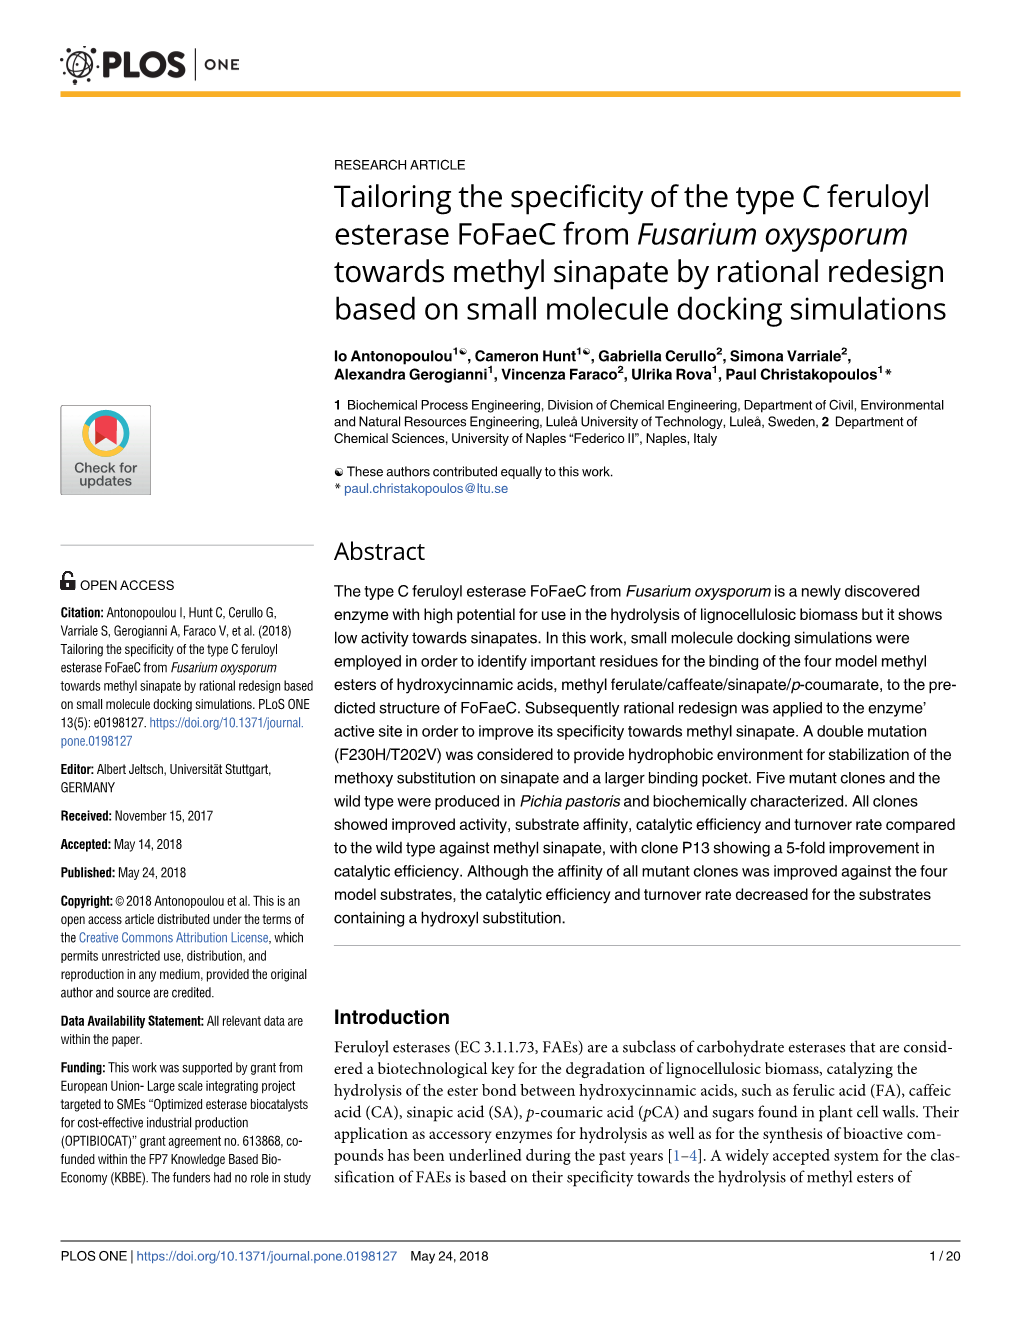 Tailoring the Specificity of the Type C Feruloyl Esterase Fofaec from Fusarium Oxysporum Towards Methyl Sinapate by Rational